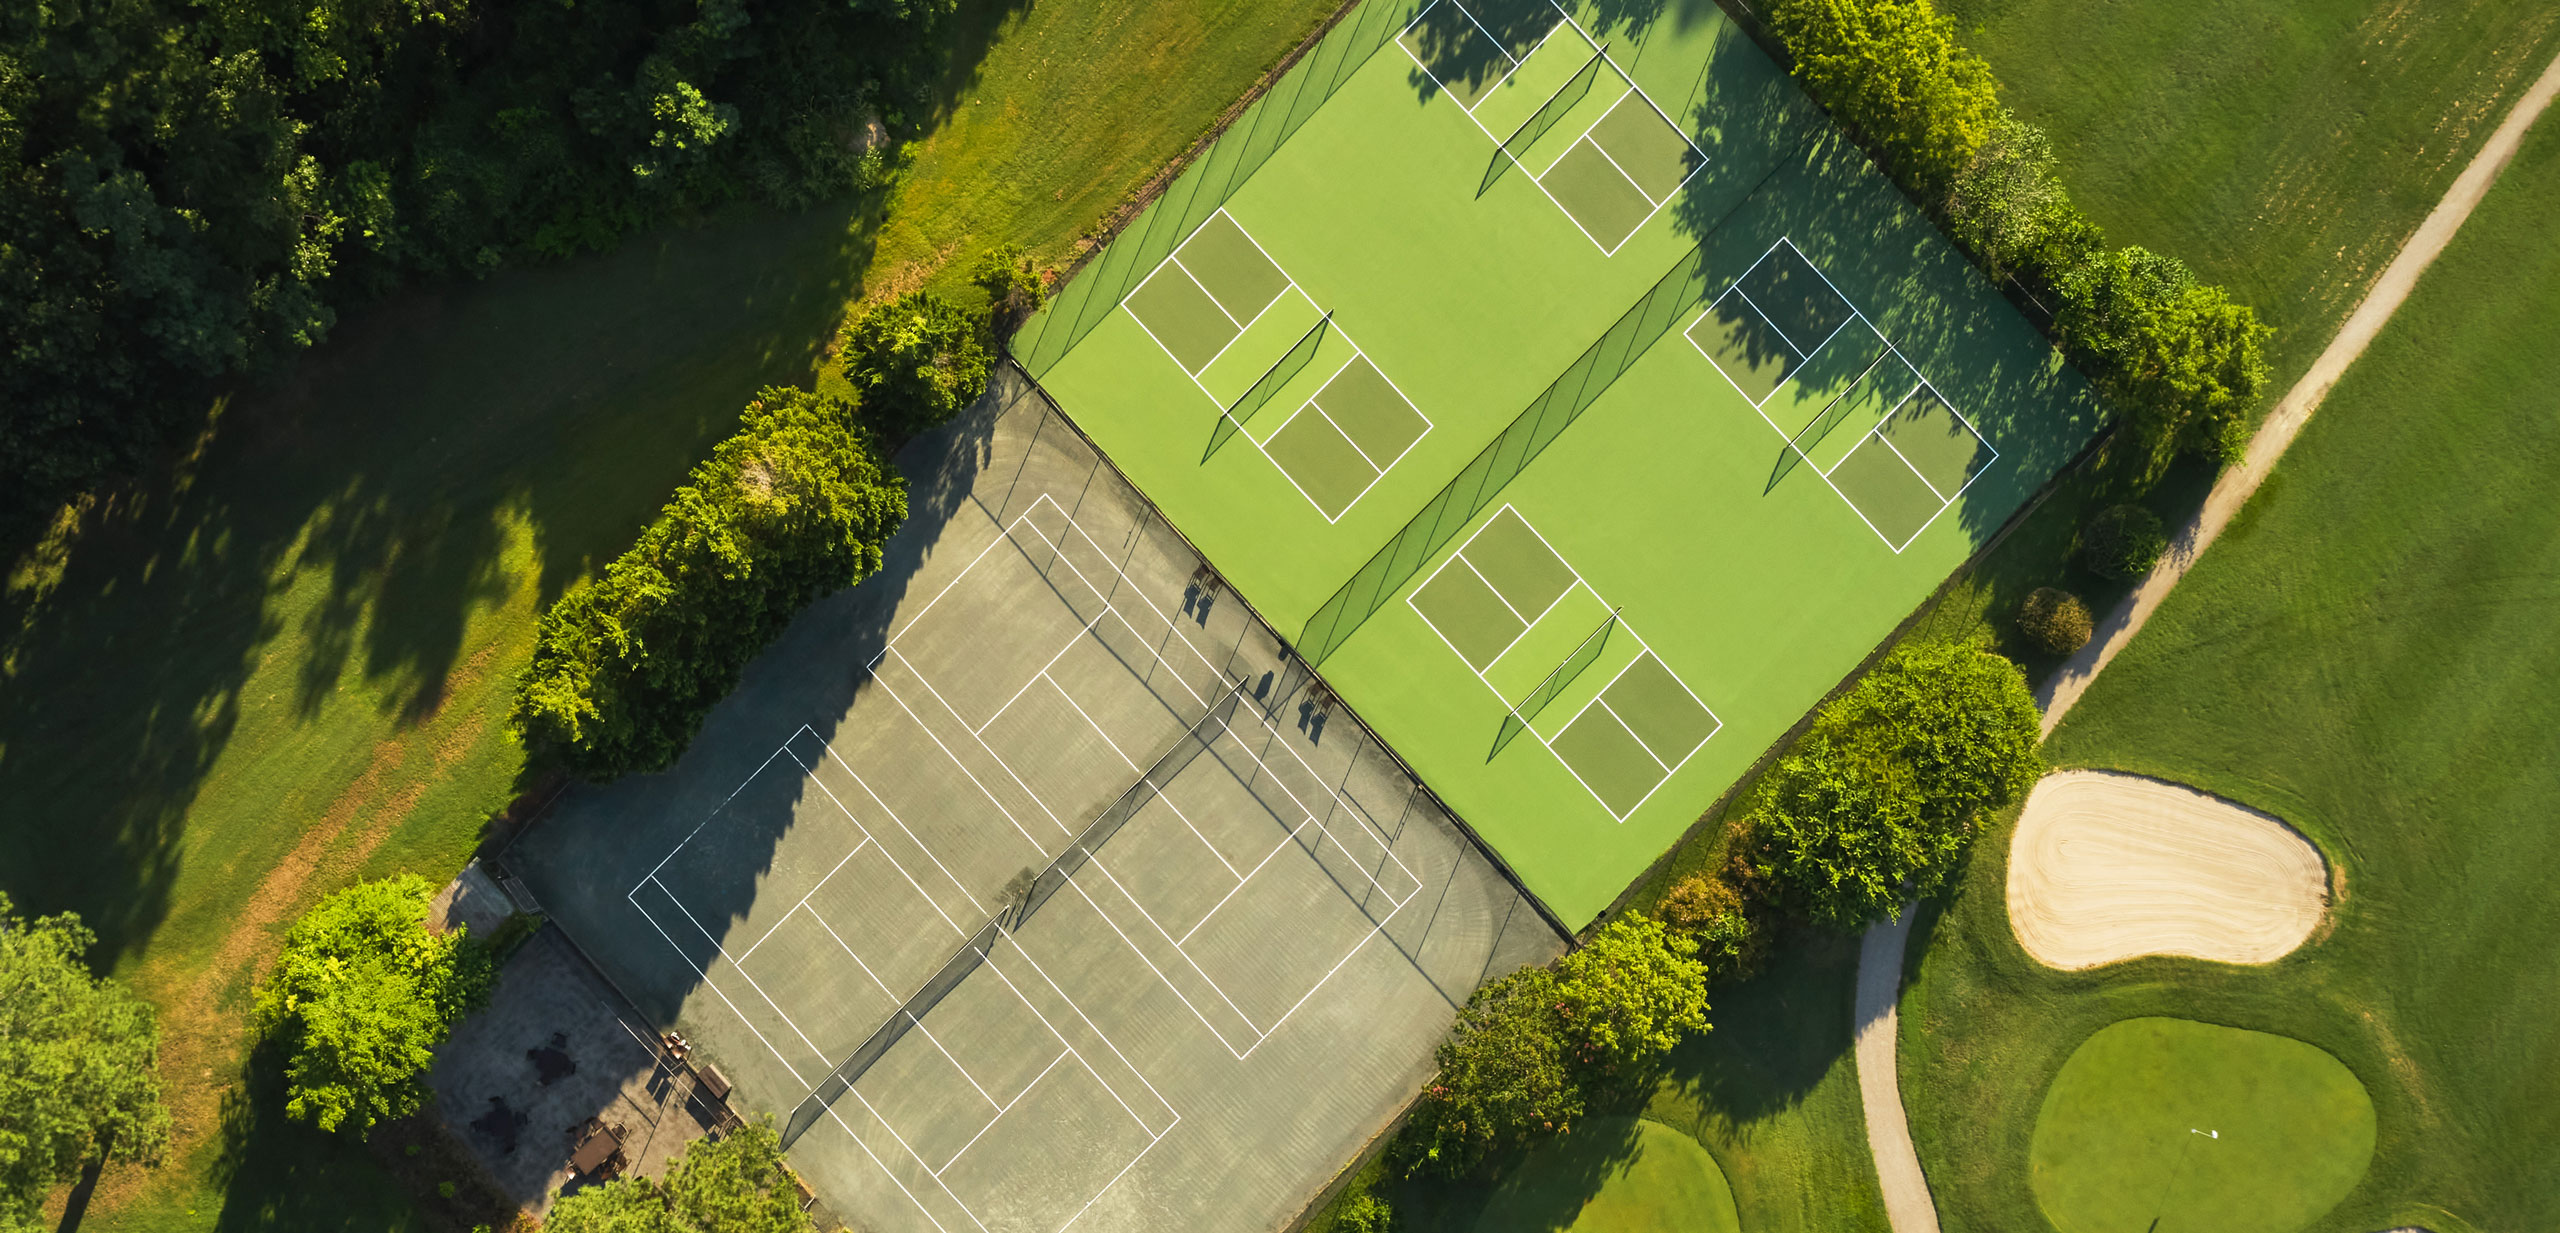 Tennis and pickle ball courts